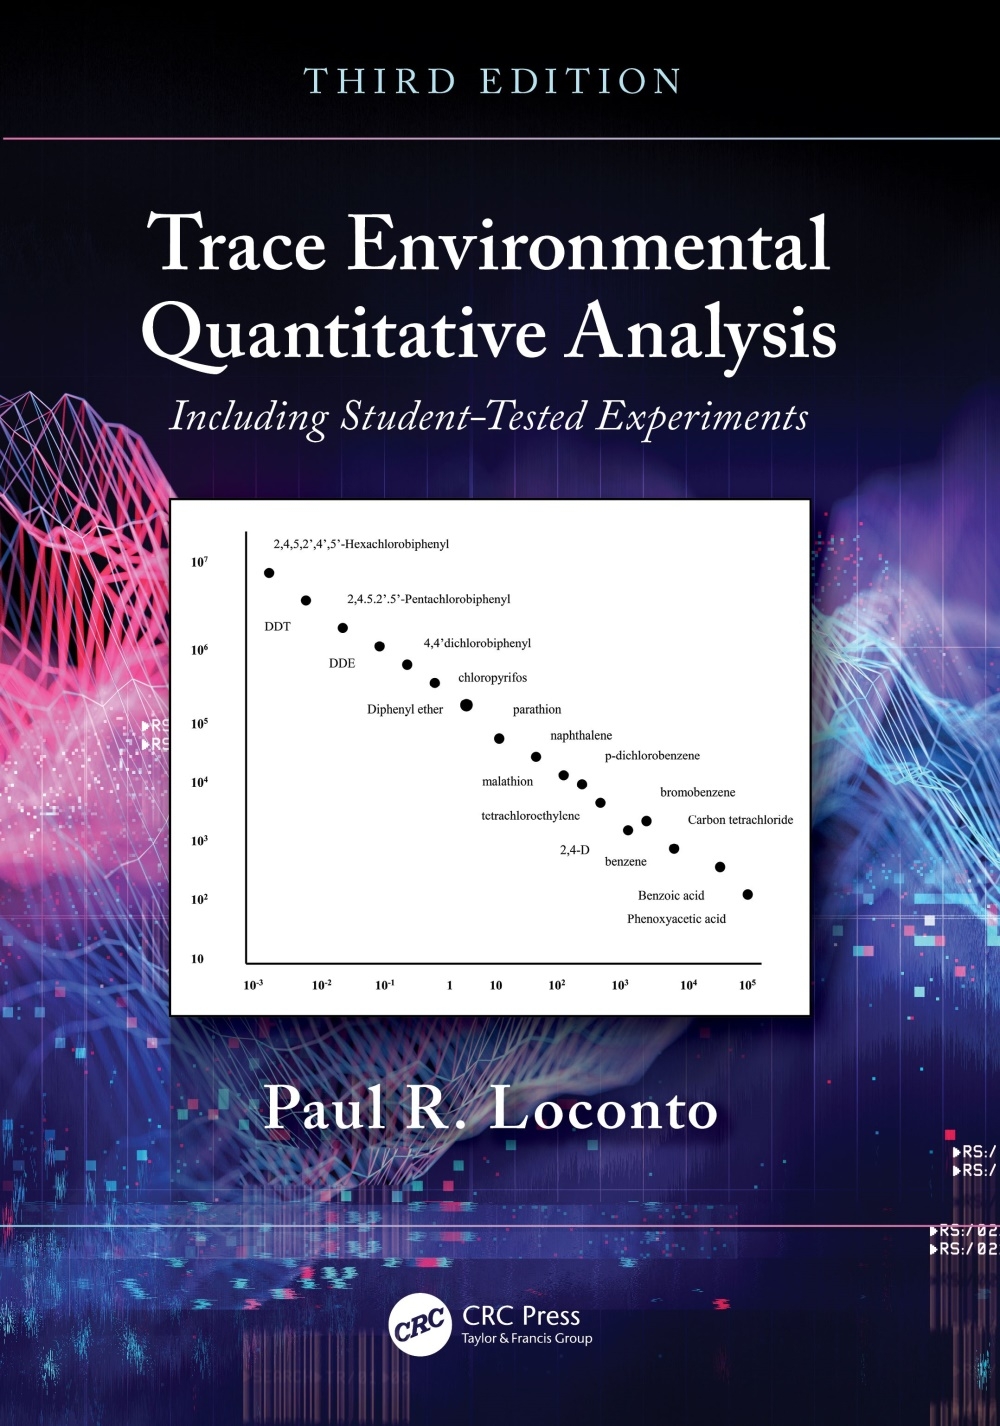 Trace Environmental Quantitative Analysis: Including Student-Tested Experiments